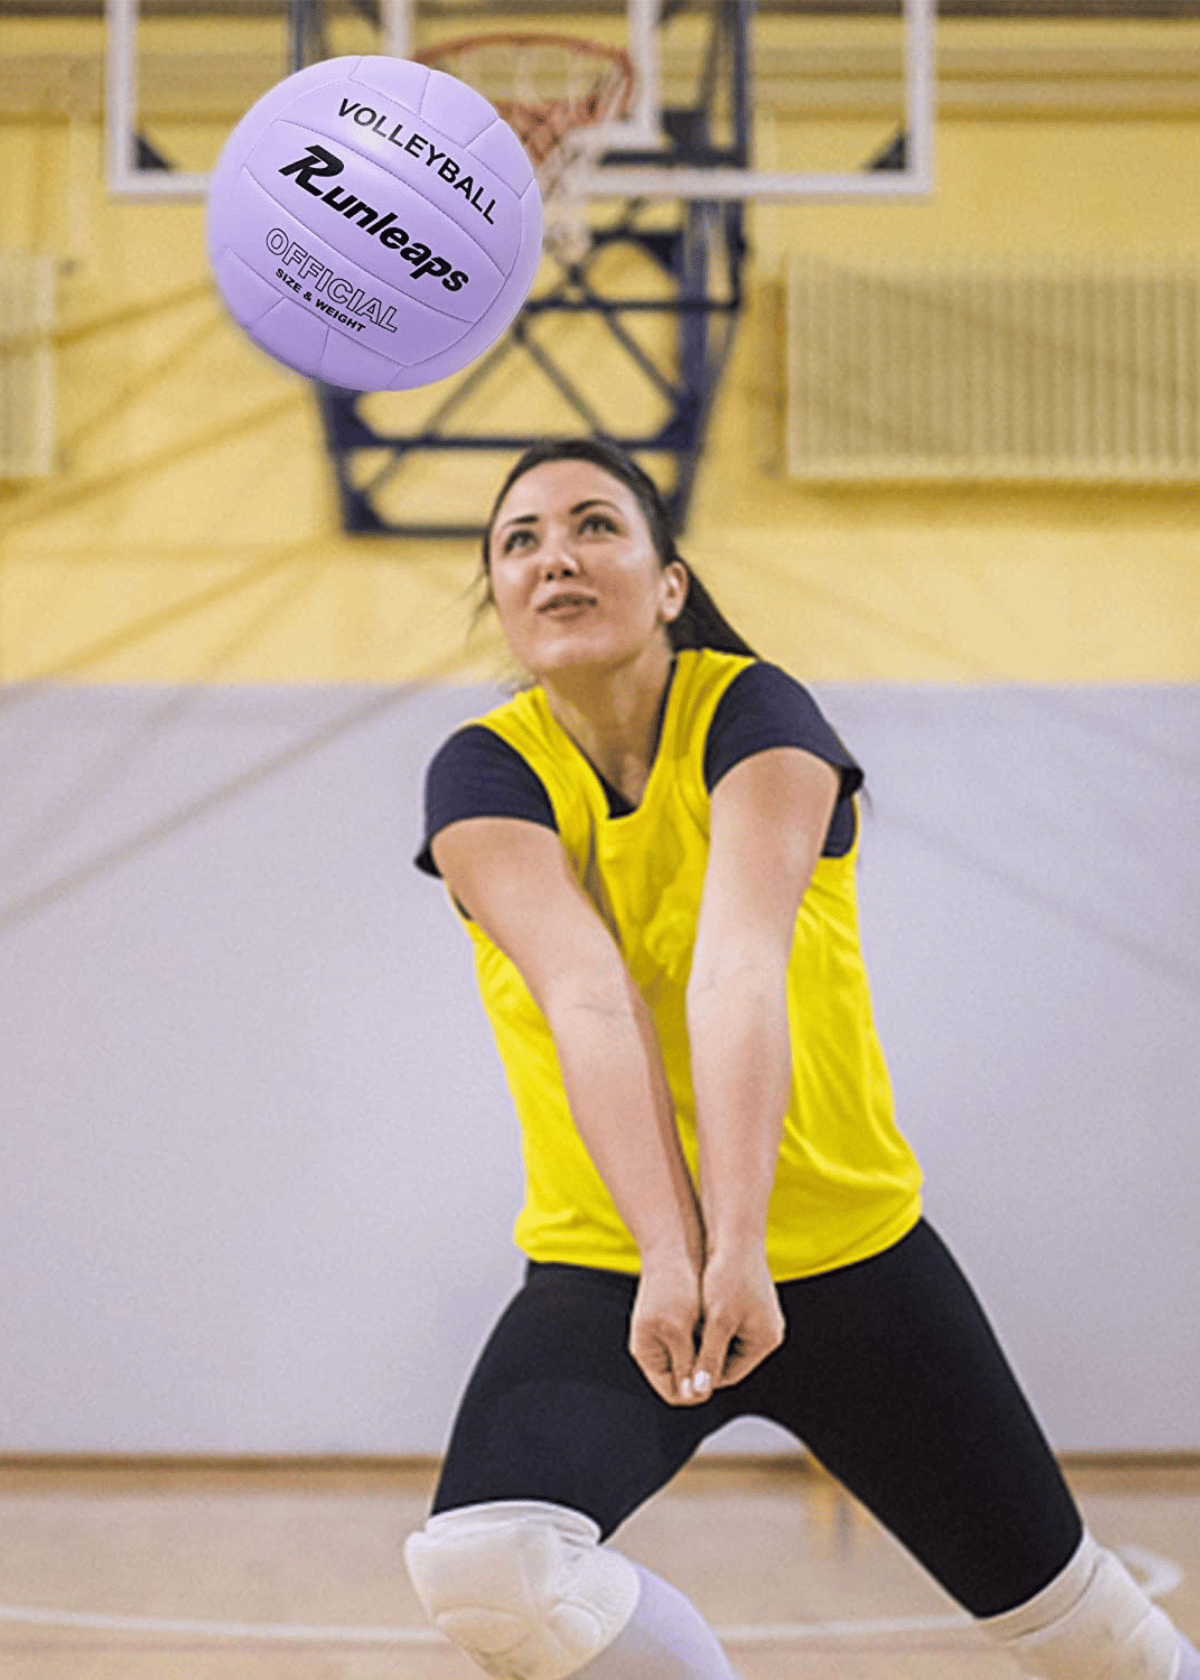 The 5 Best Purple Volleyball Balls to Up Your Game